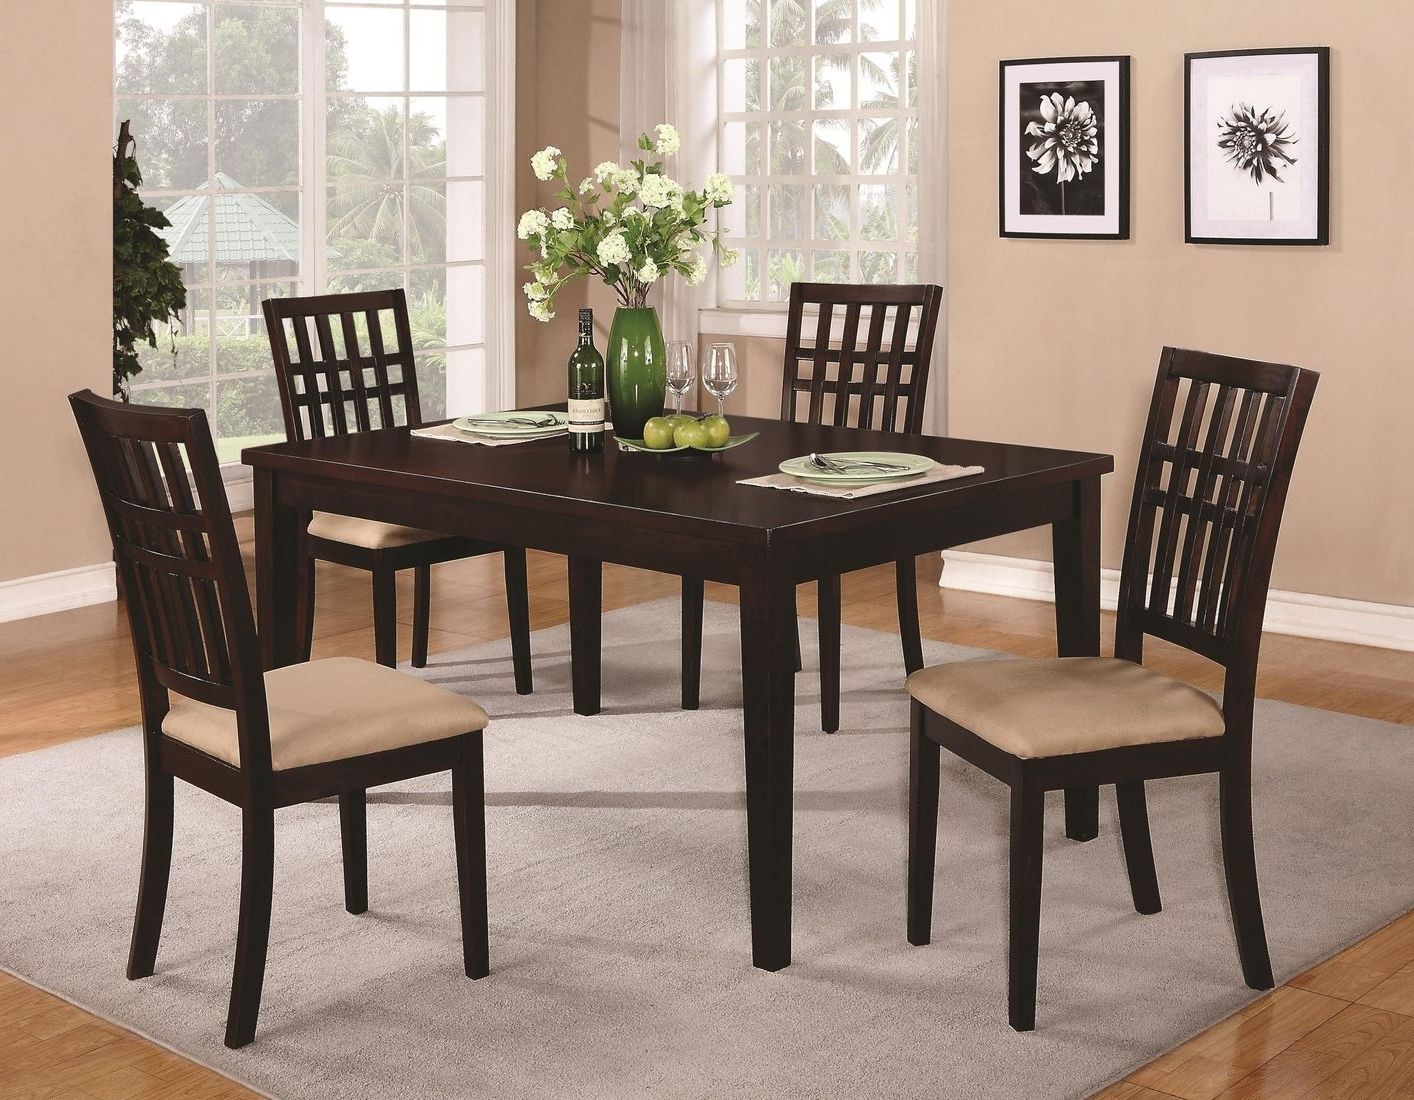 Brandt Dark Cherry Wood Dining Table – Steal A Sofa Furniture Outlet Intended For Popular Dark Dining Room Tables (Photo 1 of 25)